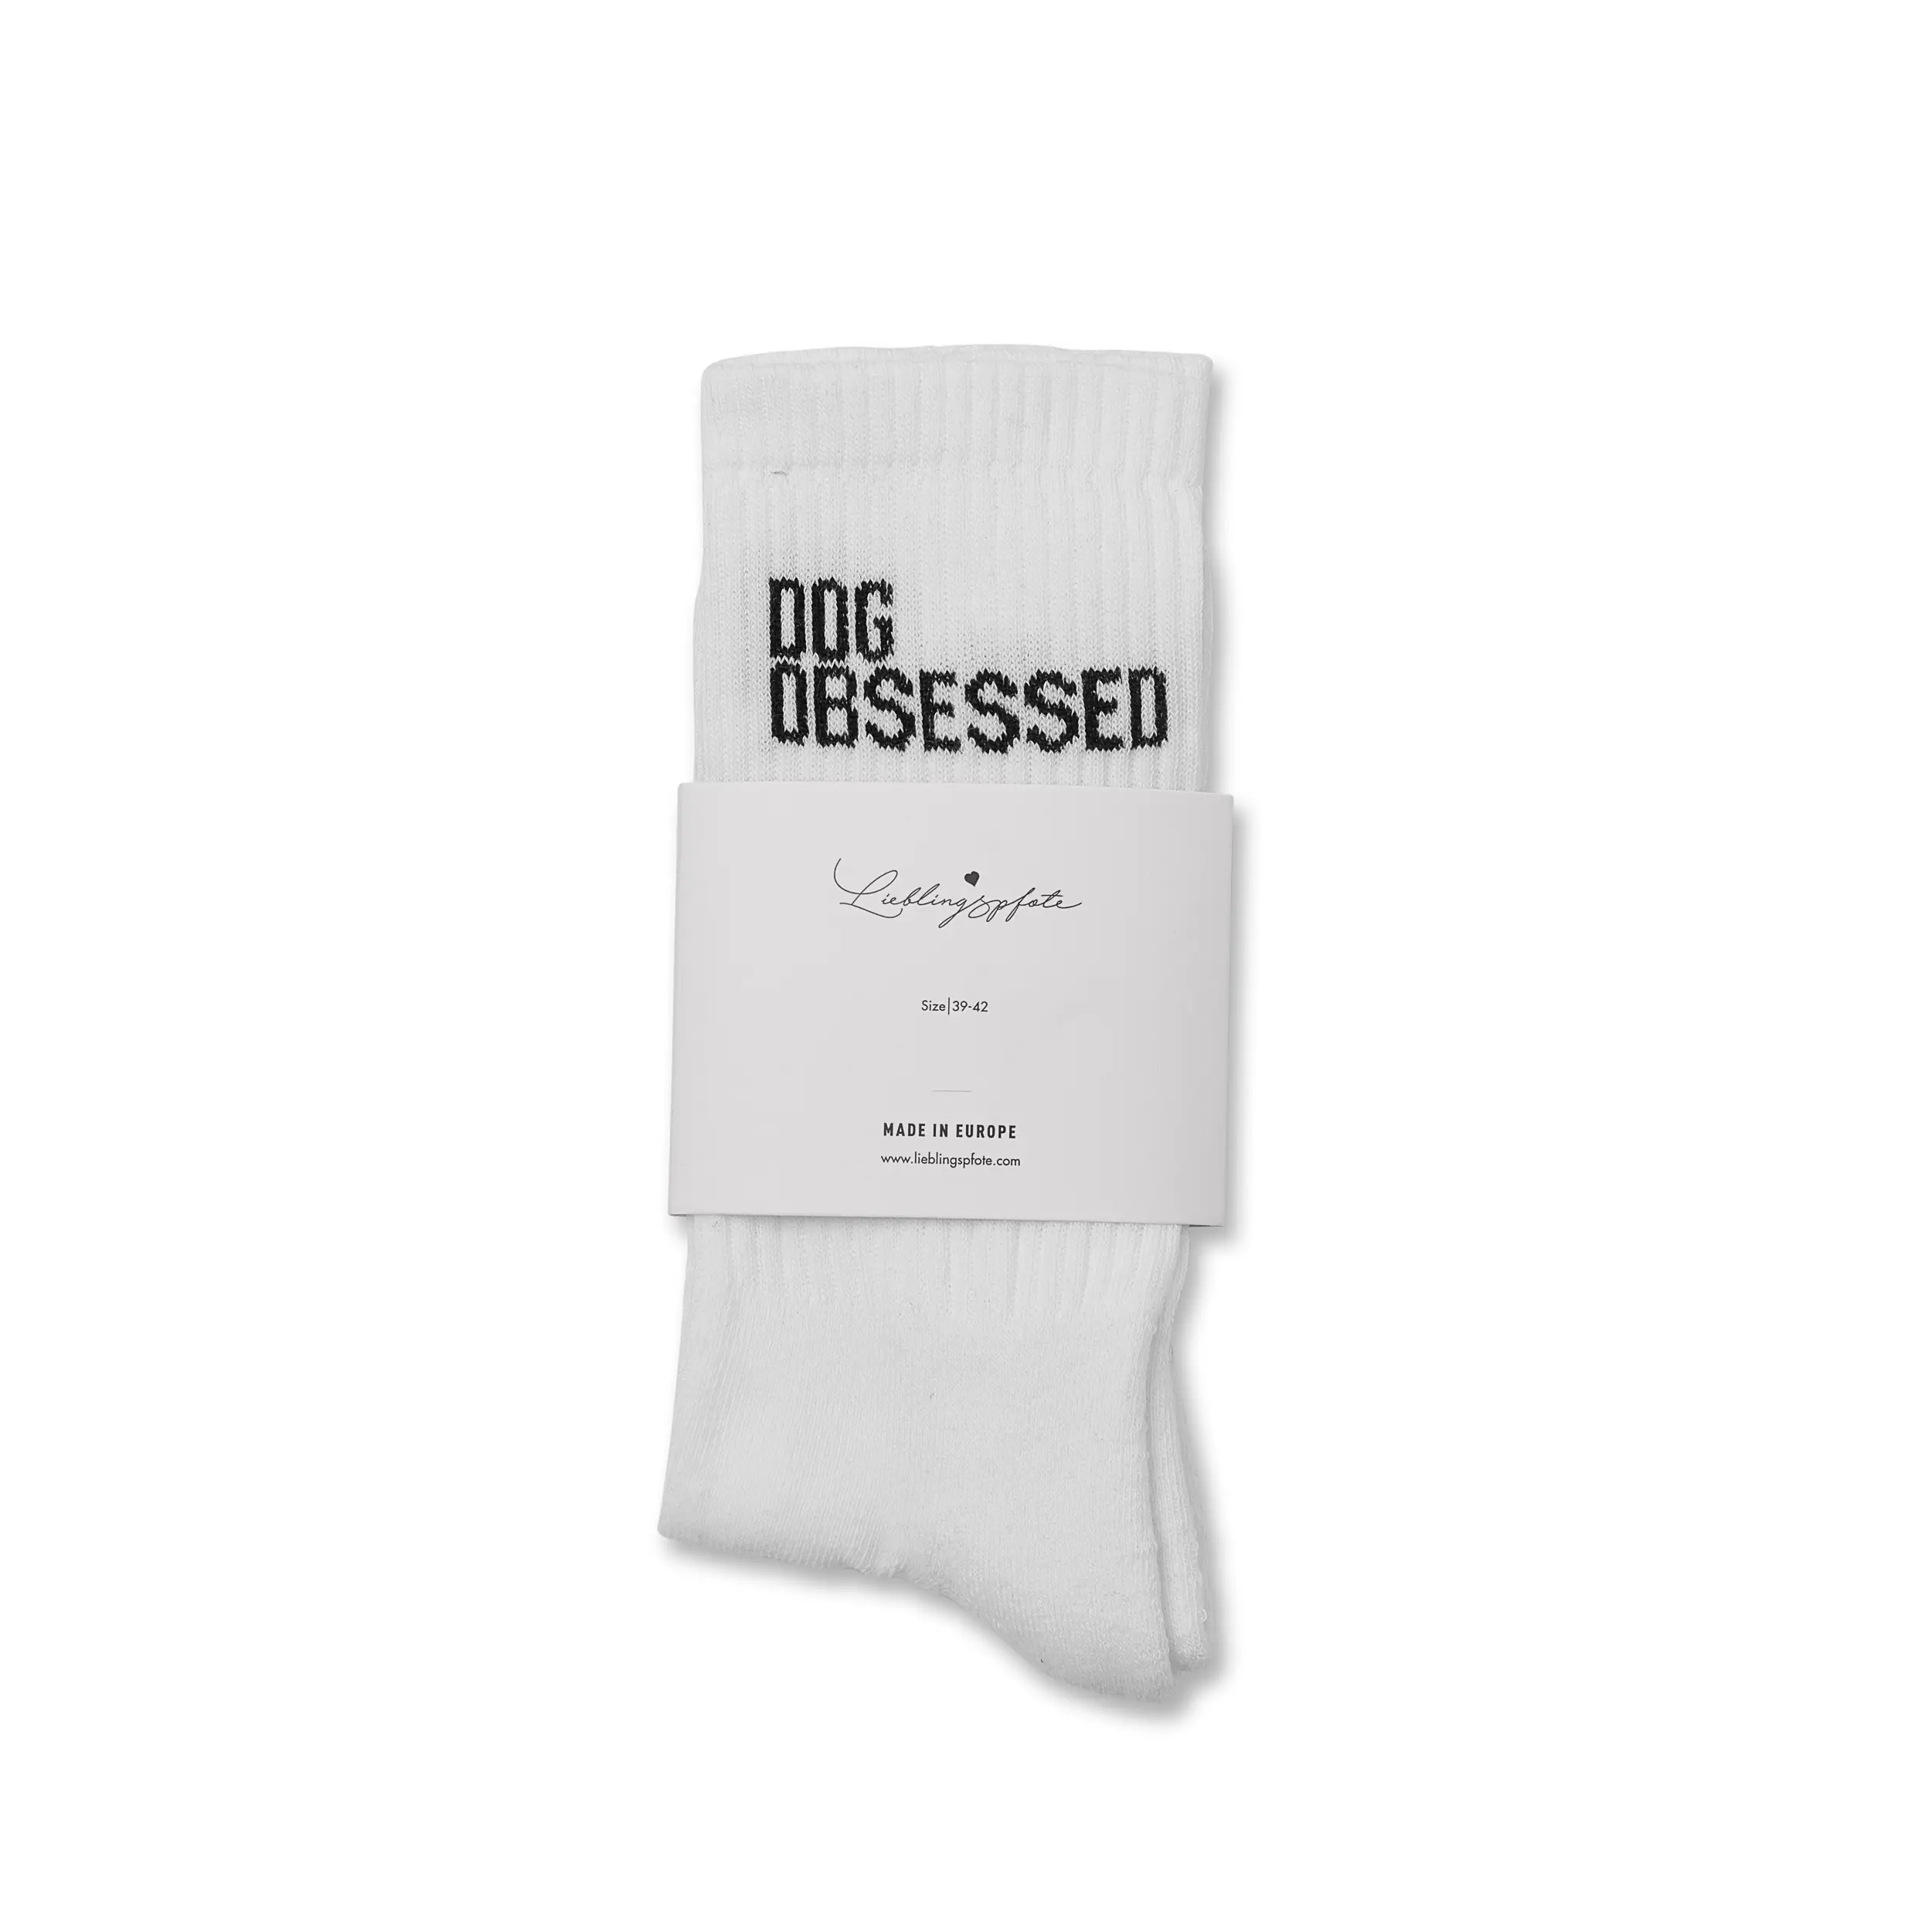 Chaussettes Dog Obsessed - Blanches-Chaussettes-Lieblingspfote-Muzon